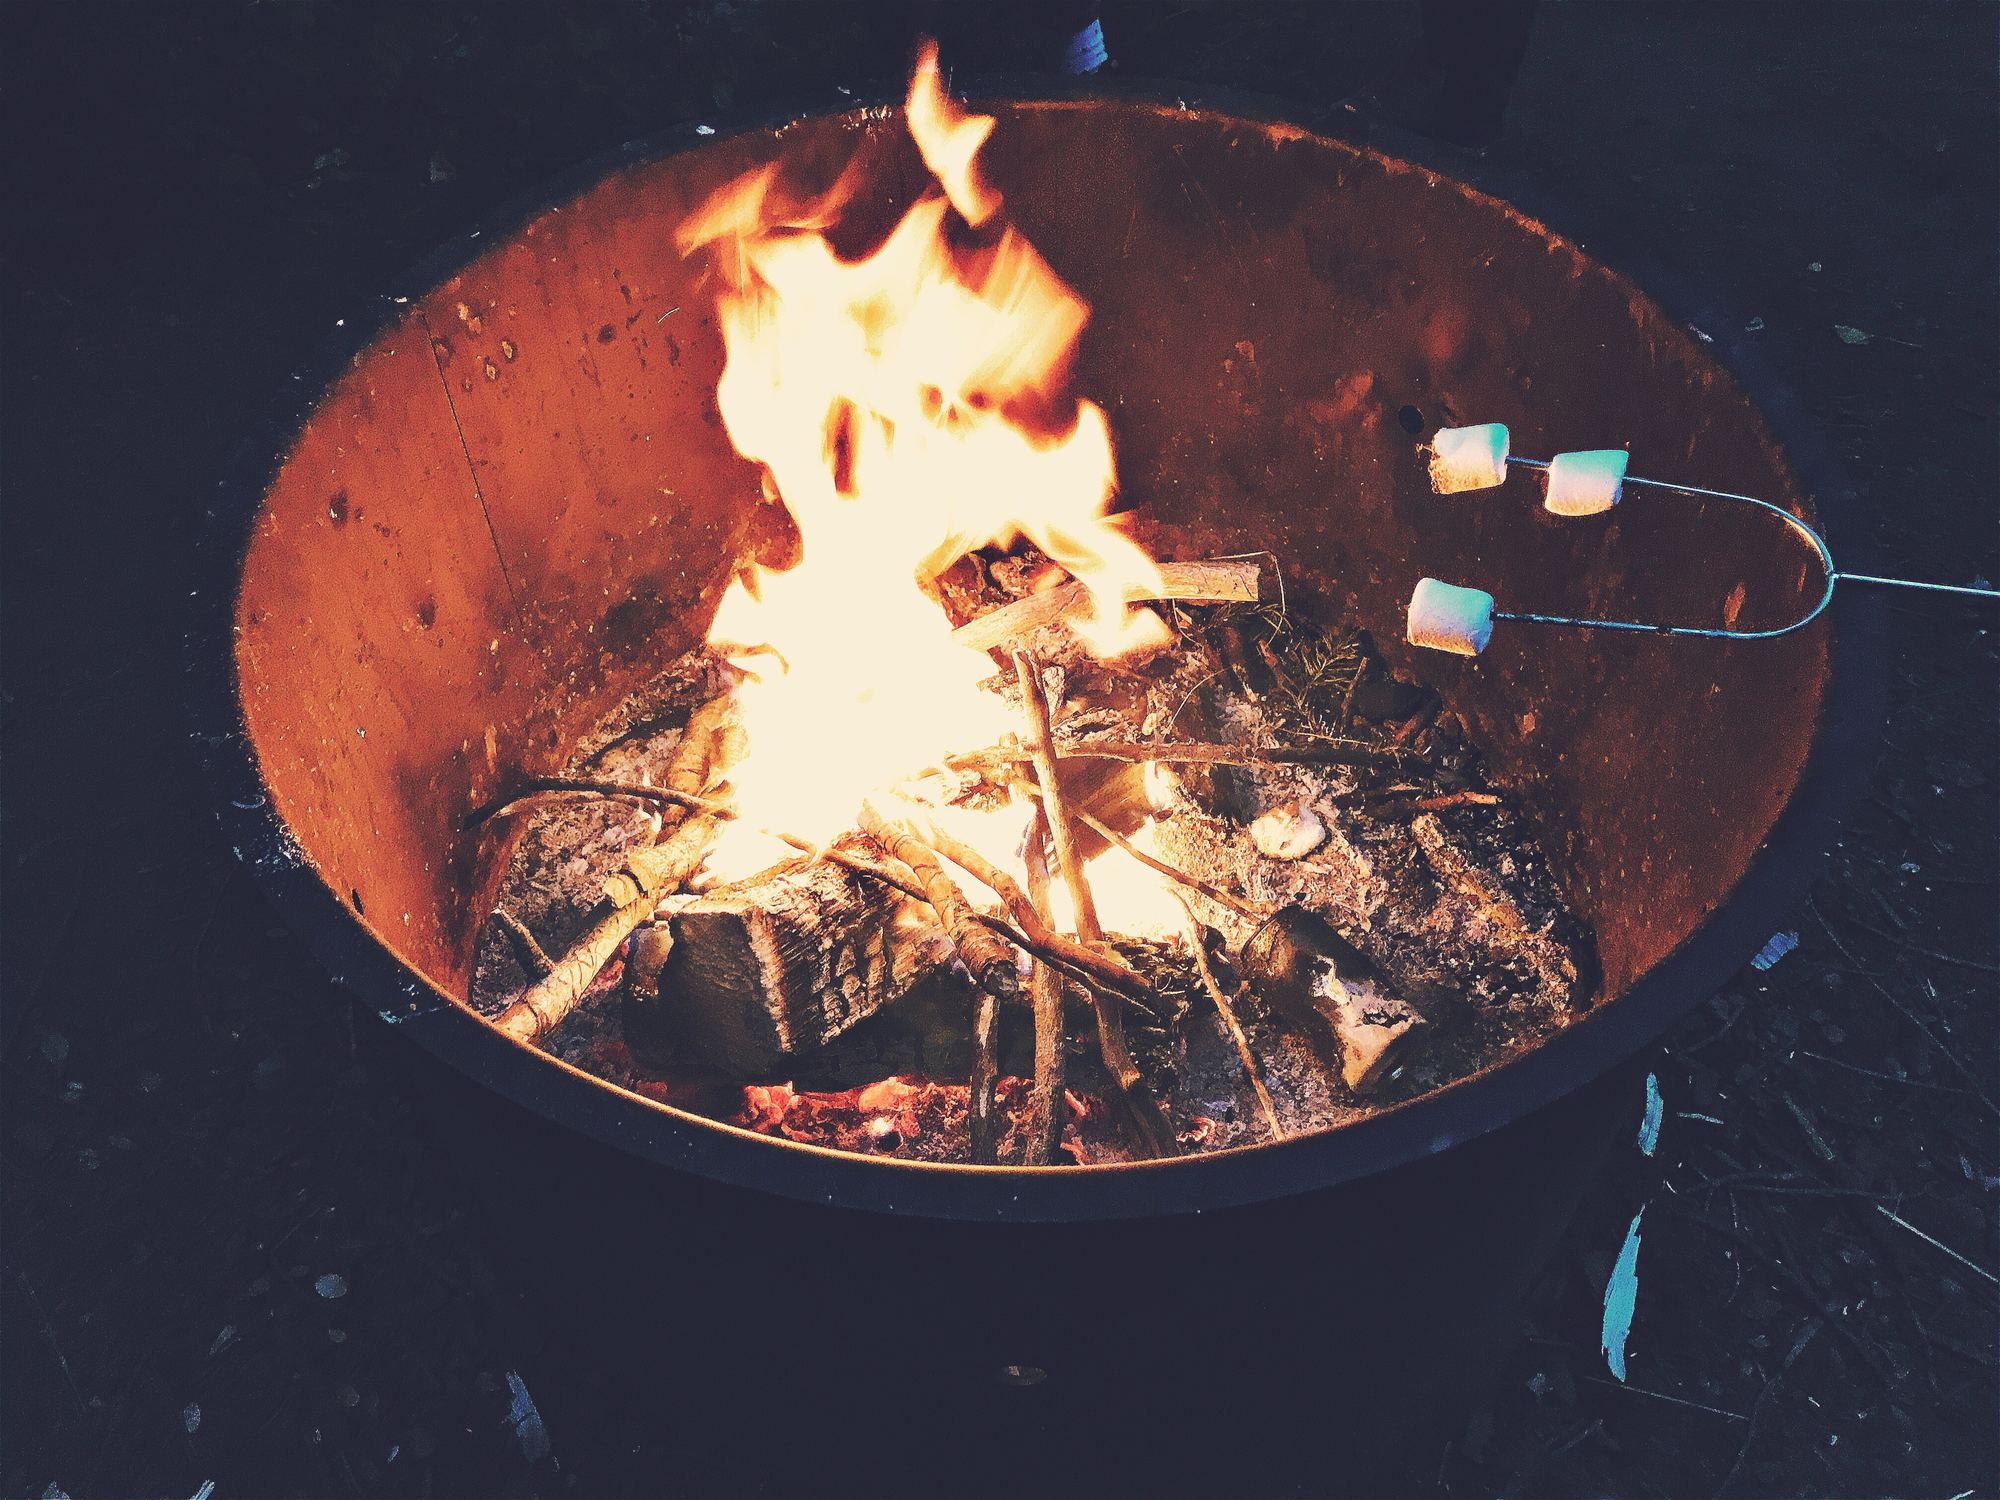 Diy Fire Pit Ideas The Ultimate List, Build A Backyard Fire Pit For $28